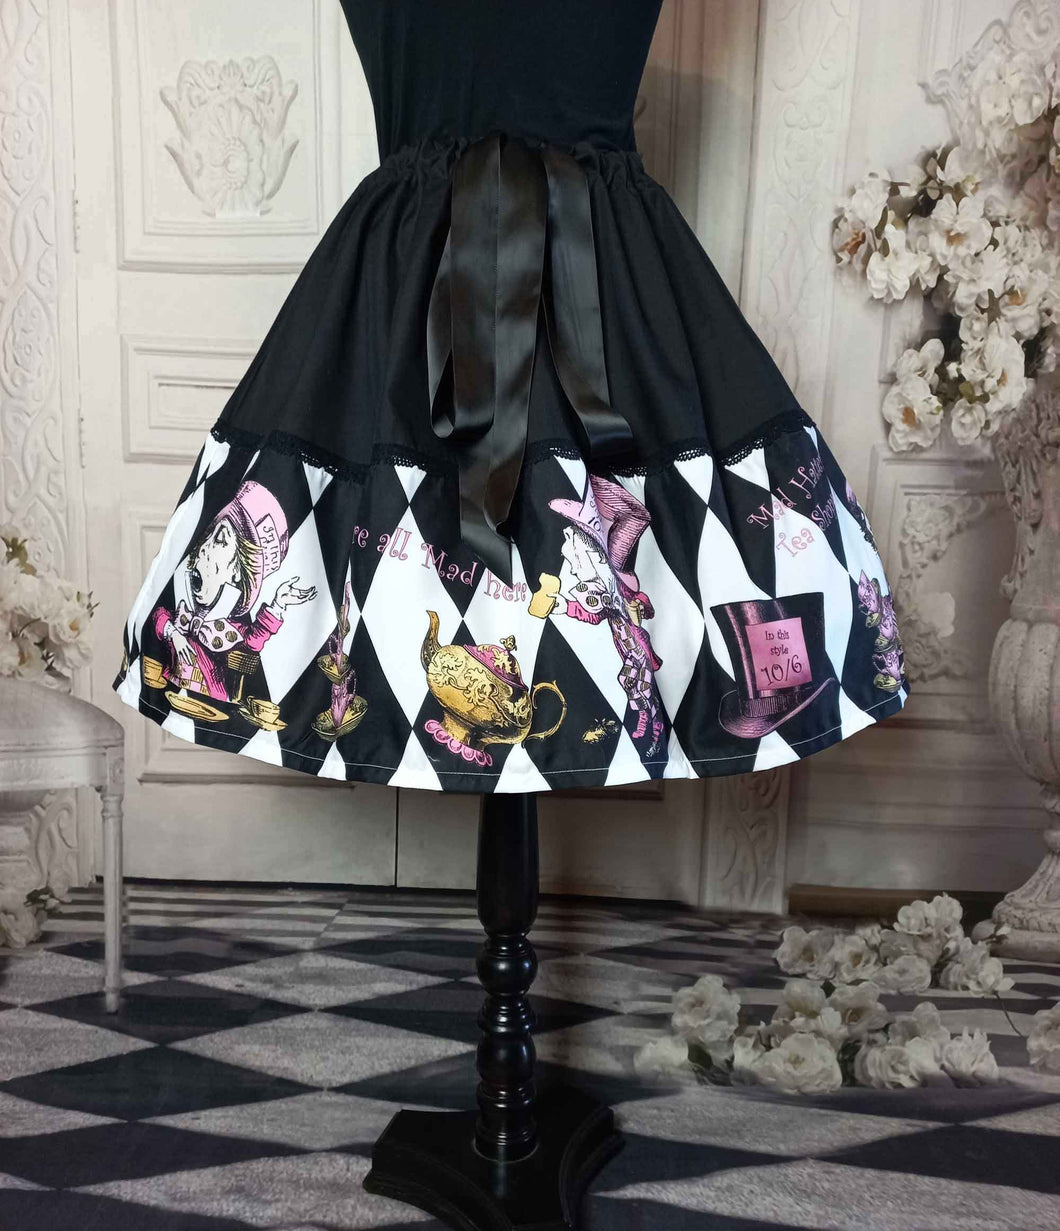 alice in wonderland mad hatter tea party full fifties style skirt.  The skirt features the mad hatter, teacups, teapots and top hats in pinks and golds on a black and white diamond print background.  The upper half of the skirt is black with a decorative ribbon tie at the fully adjustable waist